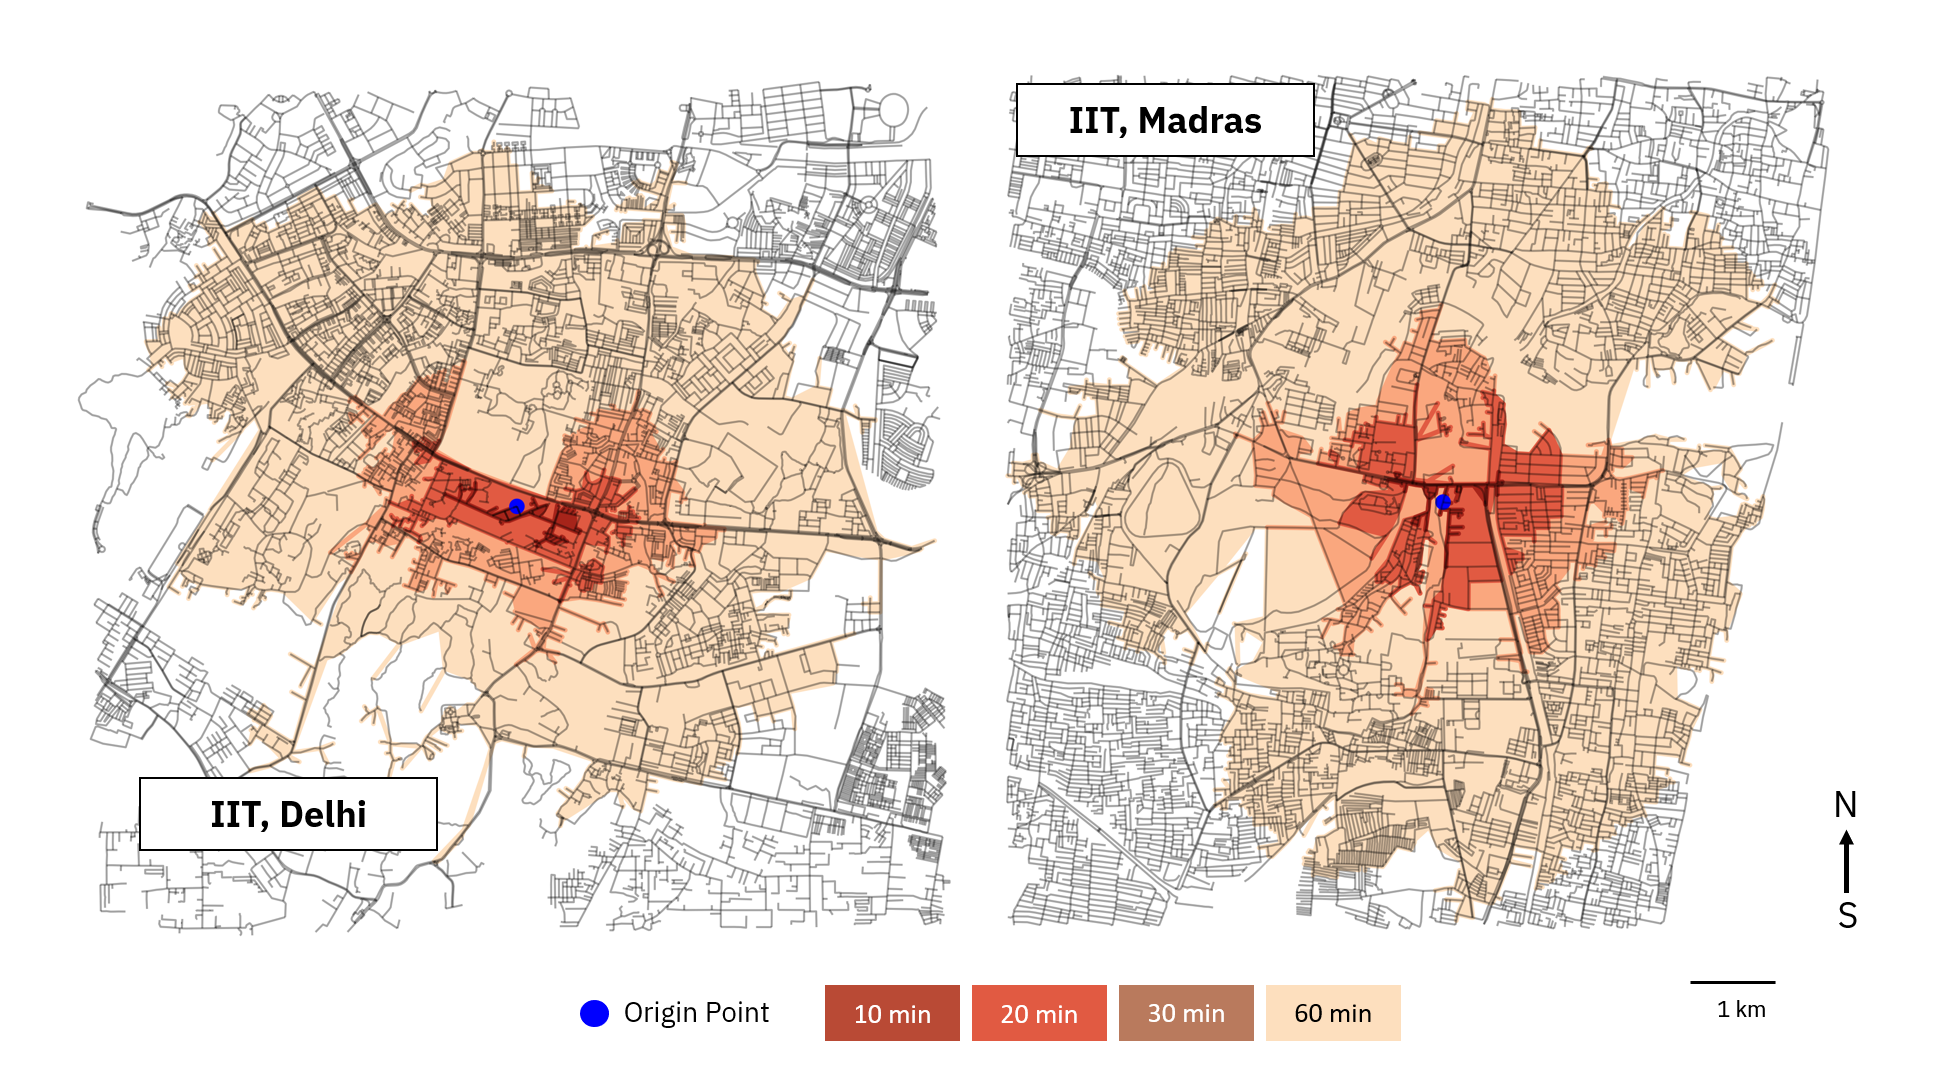 Fig 4: Farthest walking distance from IIT Delhi and IIT Madras